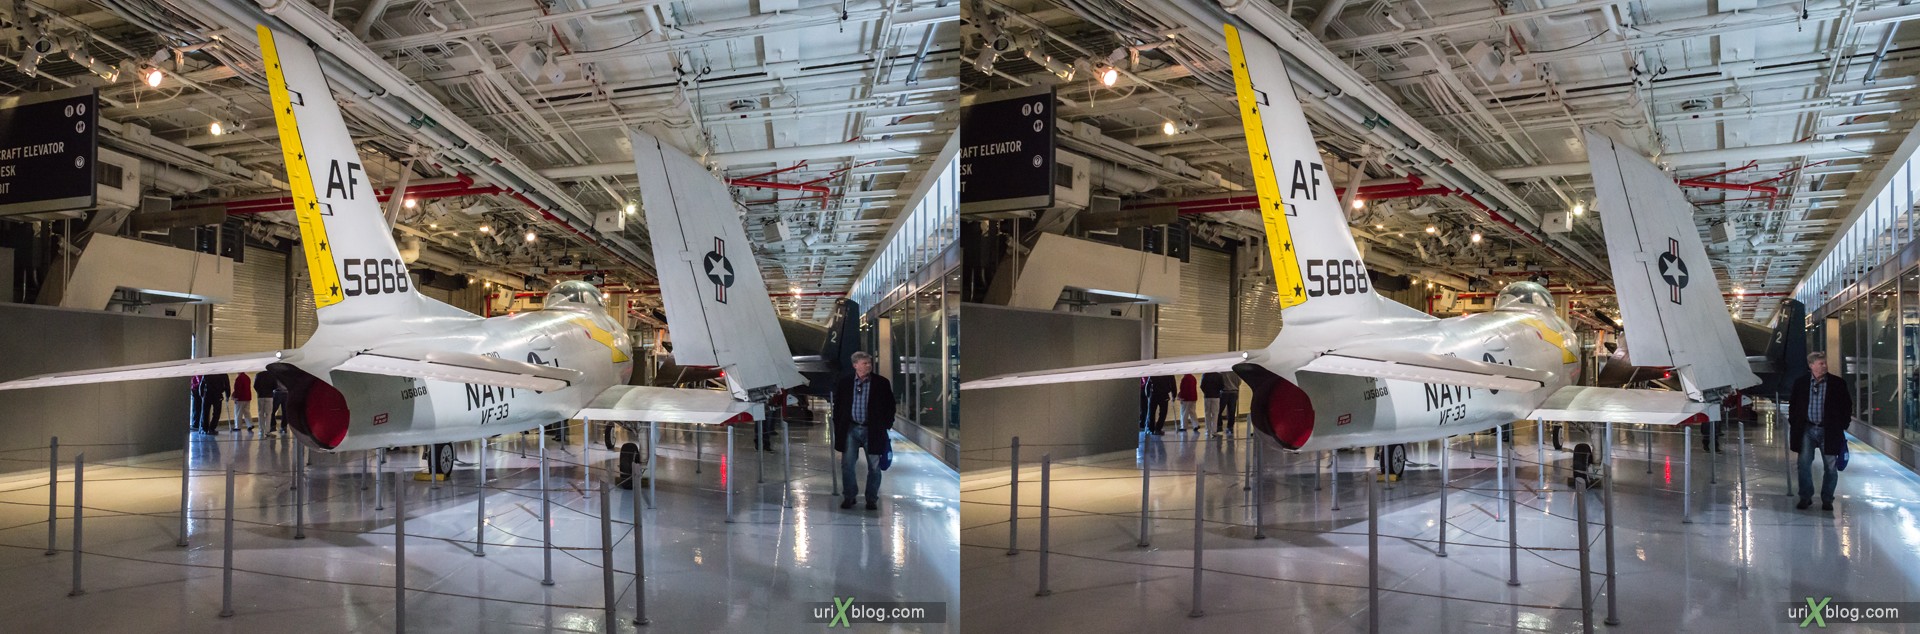 2013, USA, NYC, New York, aircraft carrier Intrepid museum, FJ-3 Fury, sea, air, space, ship, submarine, aircraft, airplane, helicopter, military, 3D, stereo pair, cross-eyed, crossview, cross view stereo pair, stereoscopic